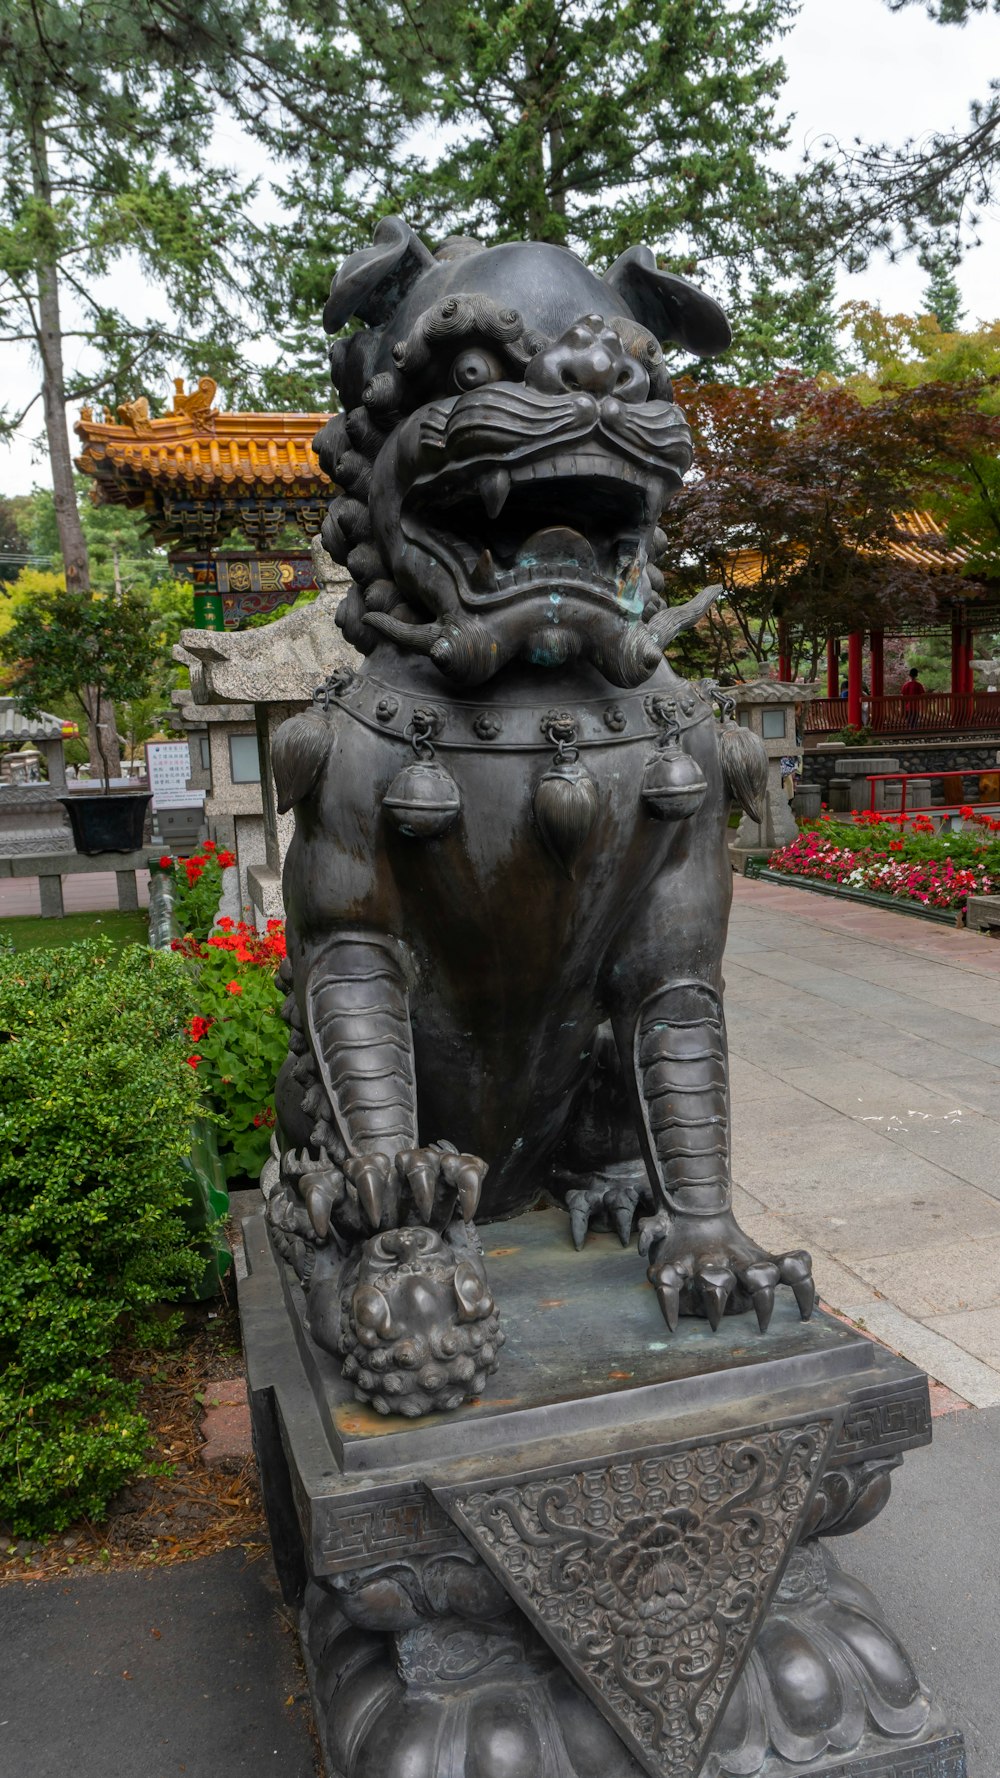 a statue of a lion in a park